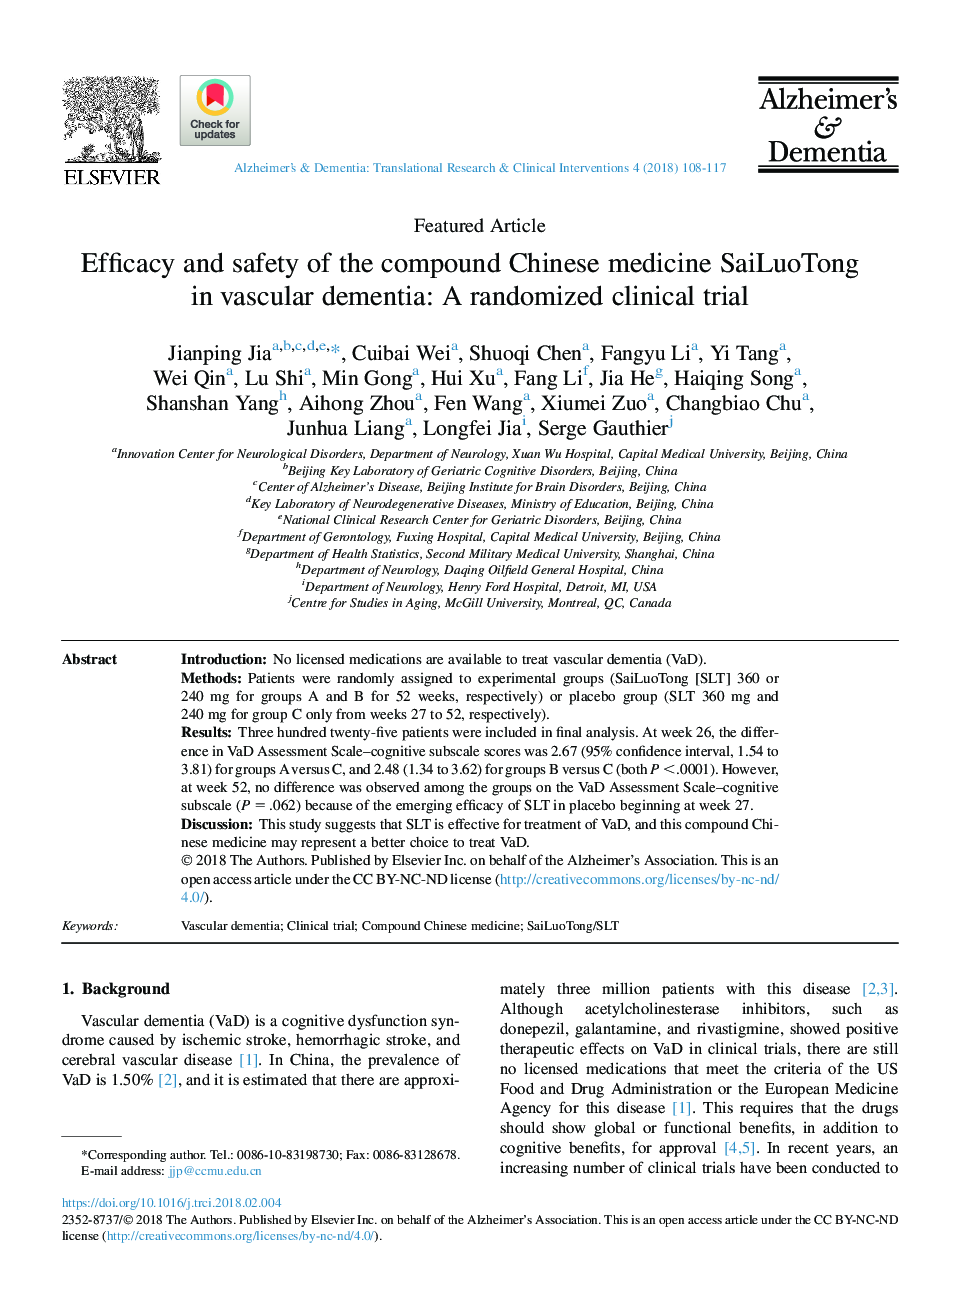 Efficacy and safety of the compound Chinese medicine SaiLuoTong inÂ vascular dementia: A randomized clinical trial